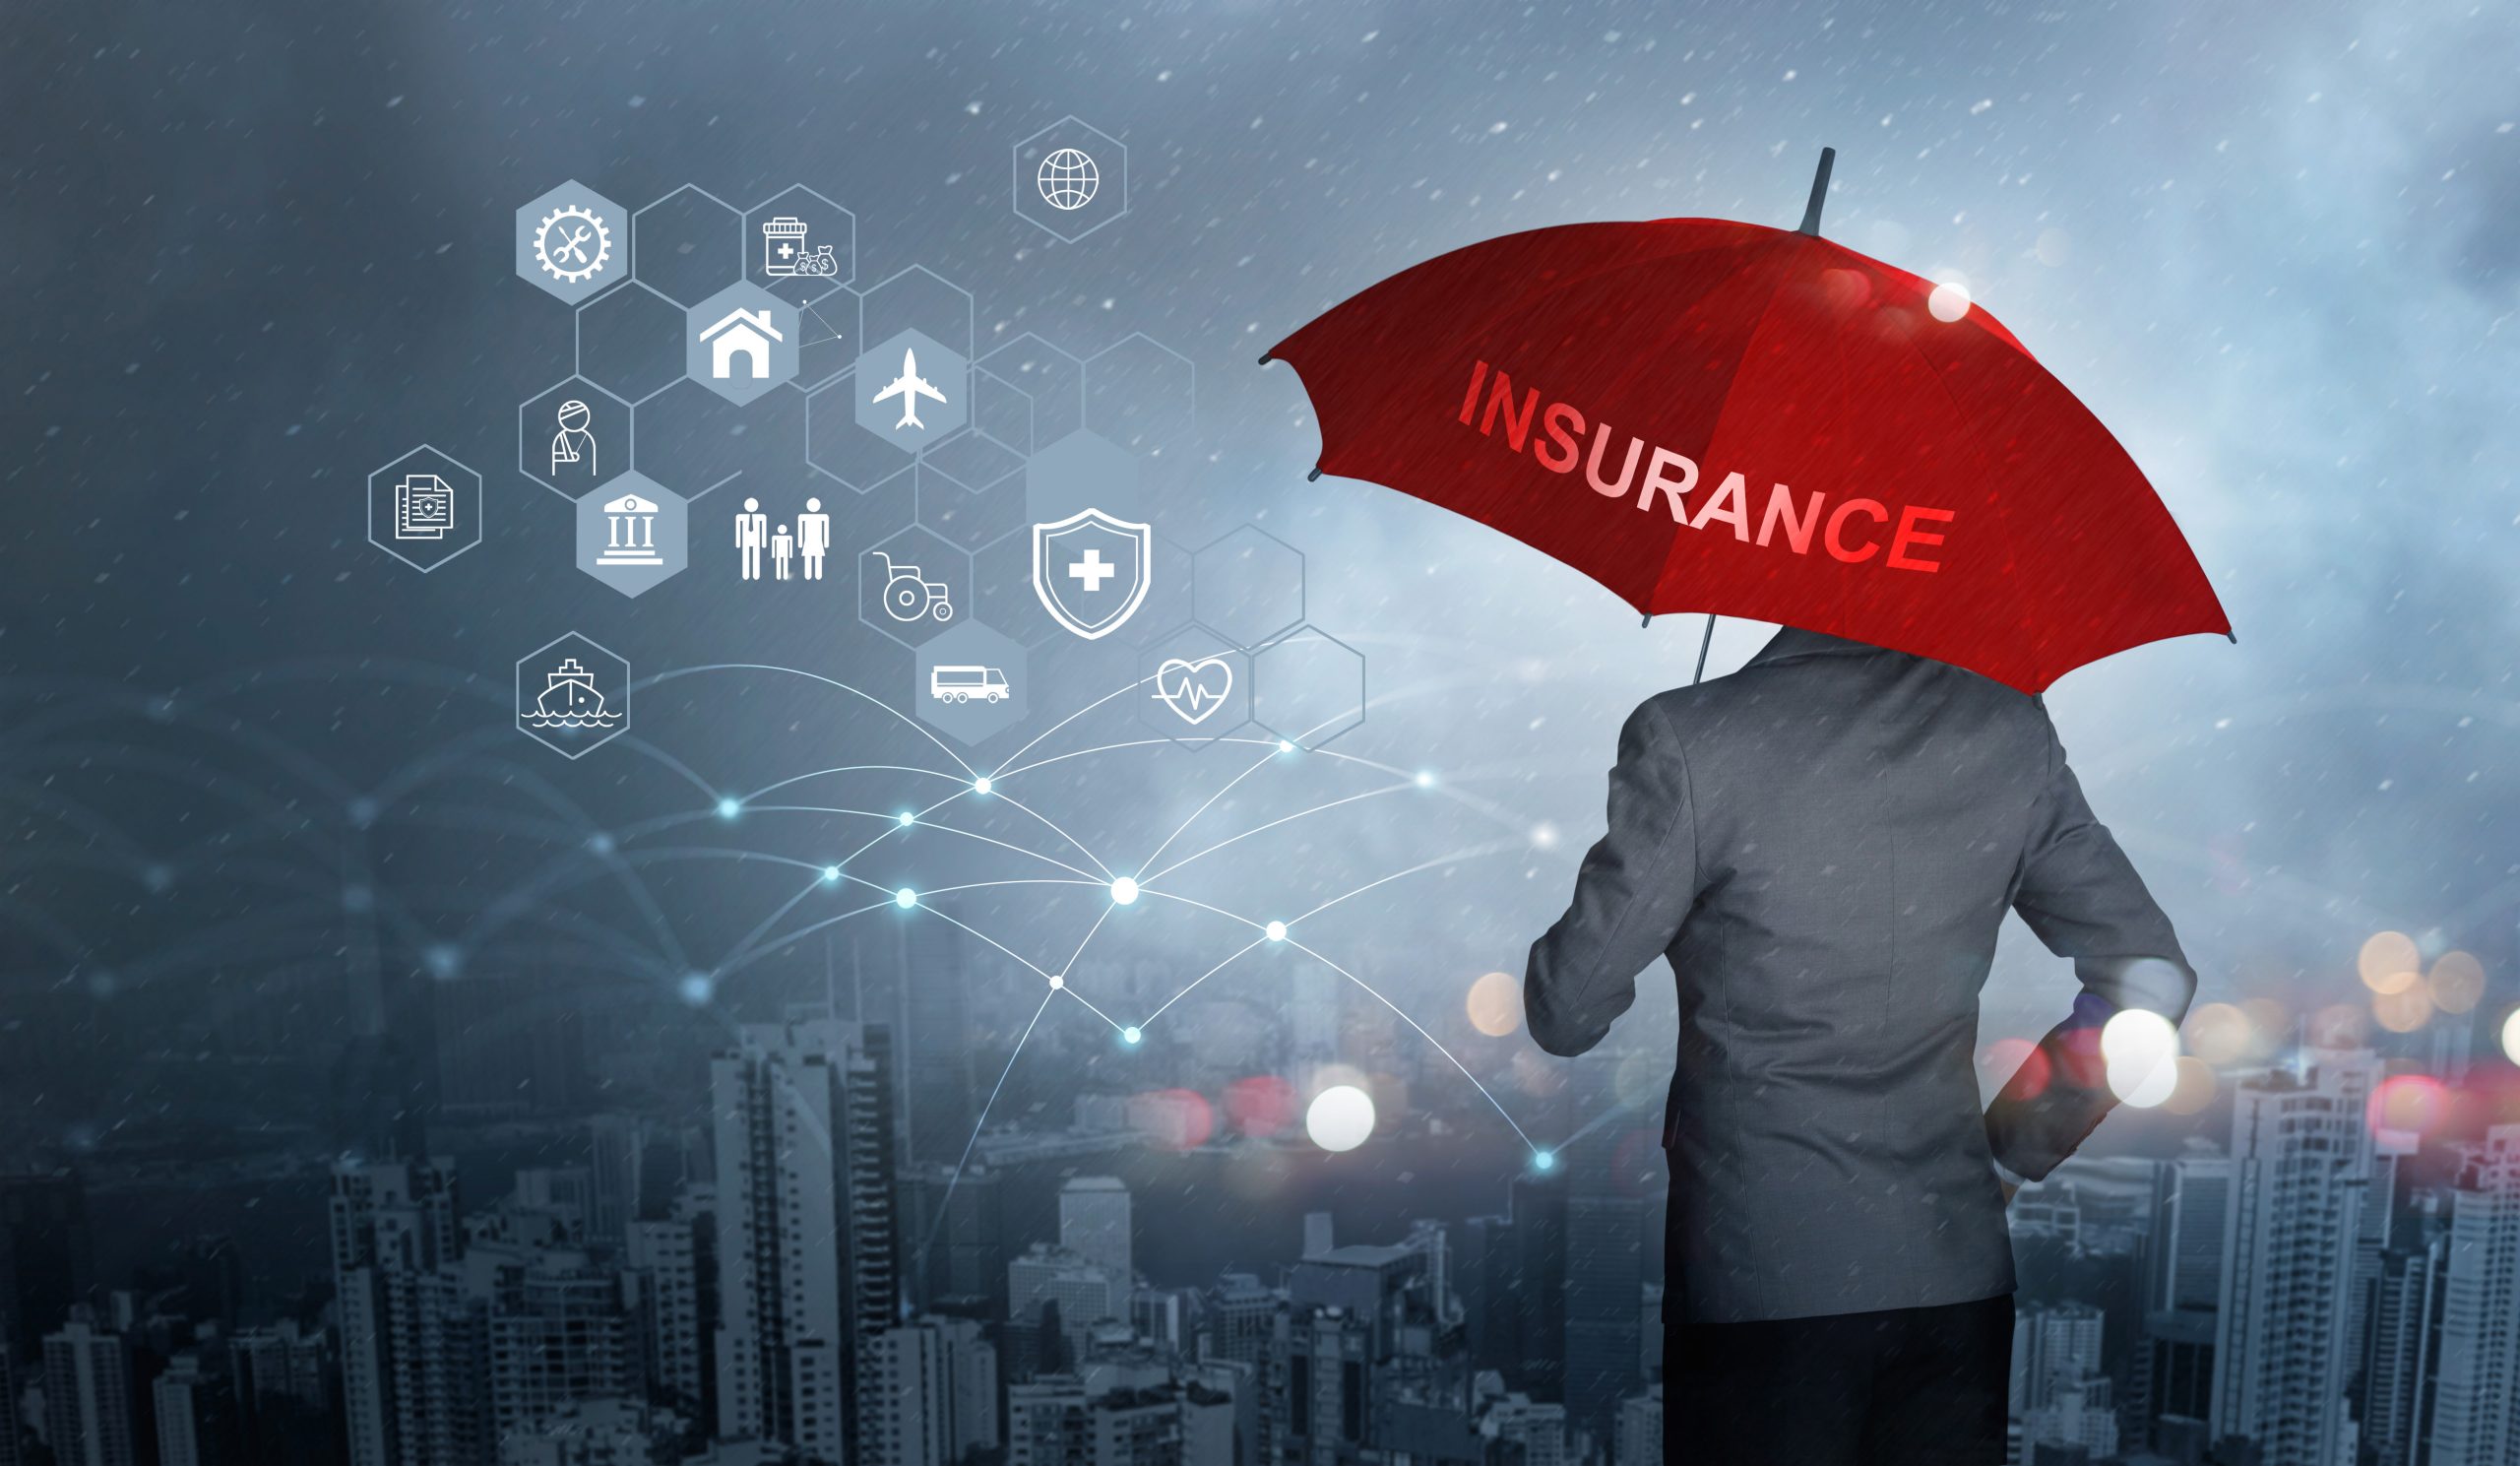 image of a person standing under a red umbrella labeled 'insurance,' overlooking a city skyline with icons representing health and social institutions, symbolizing the complexities of navigating insurance coverage for mental health care under federal parity laws